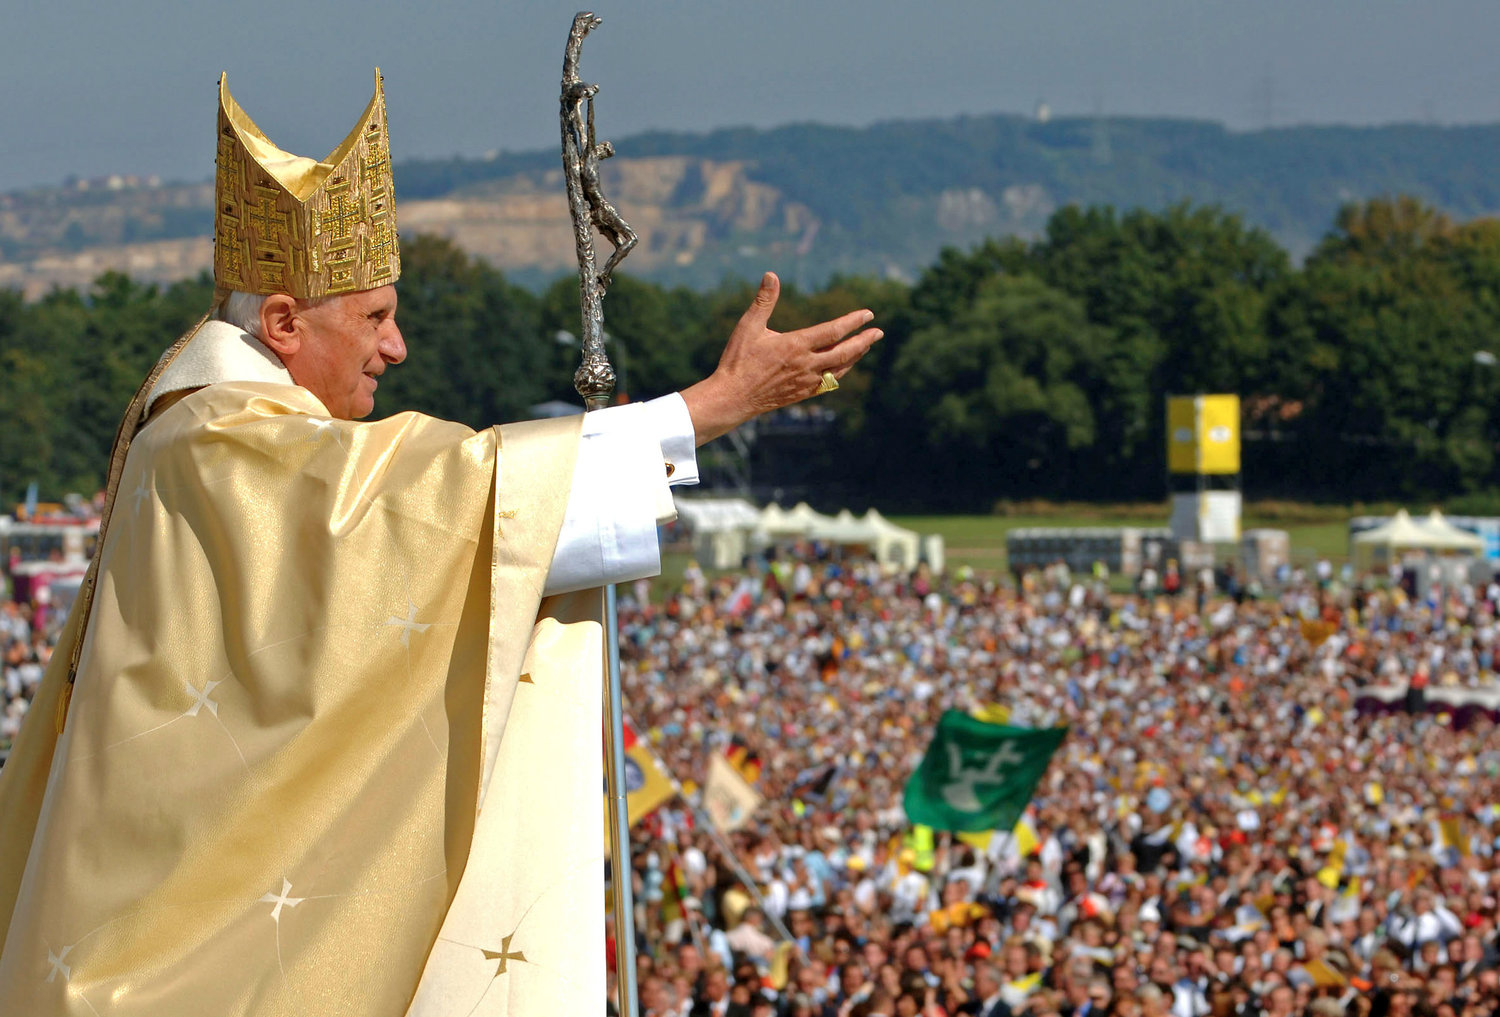 Pope Benedict XVI waves to the crowd at the end of a papal Mass at the Islinger field in Regensburg, southern Germany, some 75 miles northeast of Munich, in this September 2006 file photo.